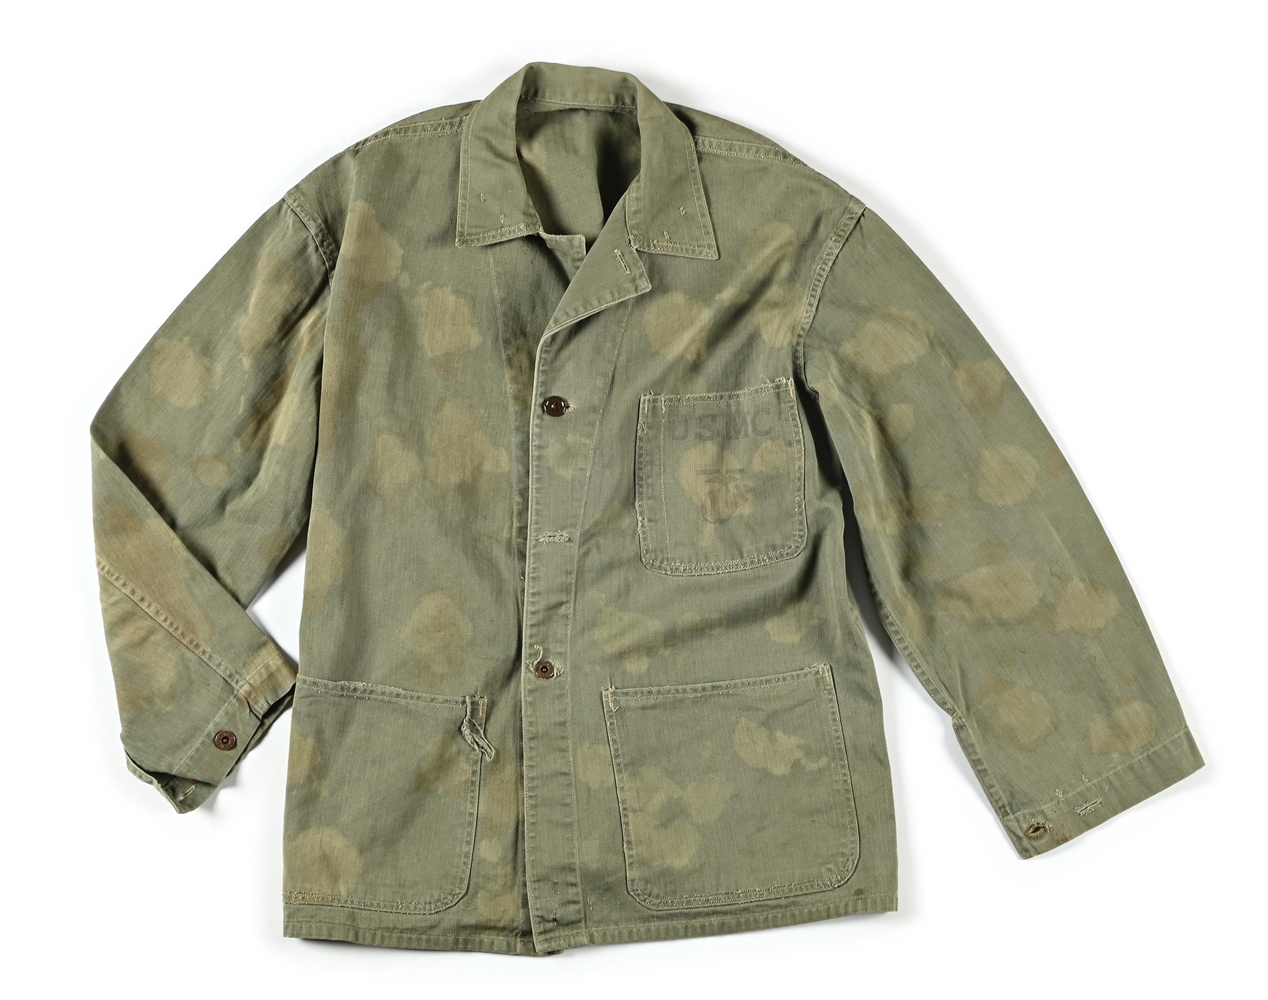 US WWII USMC P41 FATIGUE JACKET WITH THEATER BLEACH CAMOUFLAGE PATTERN.